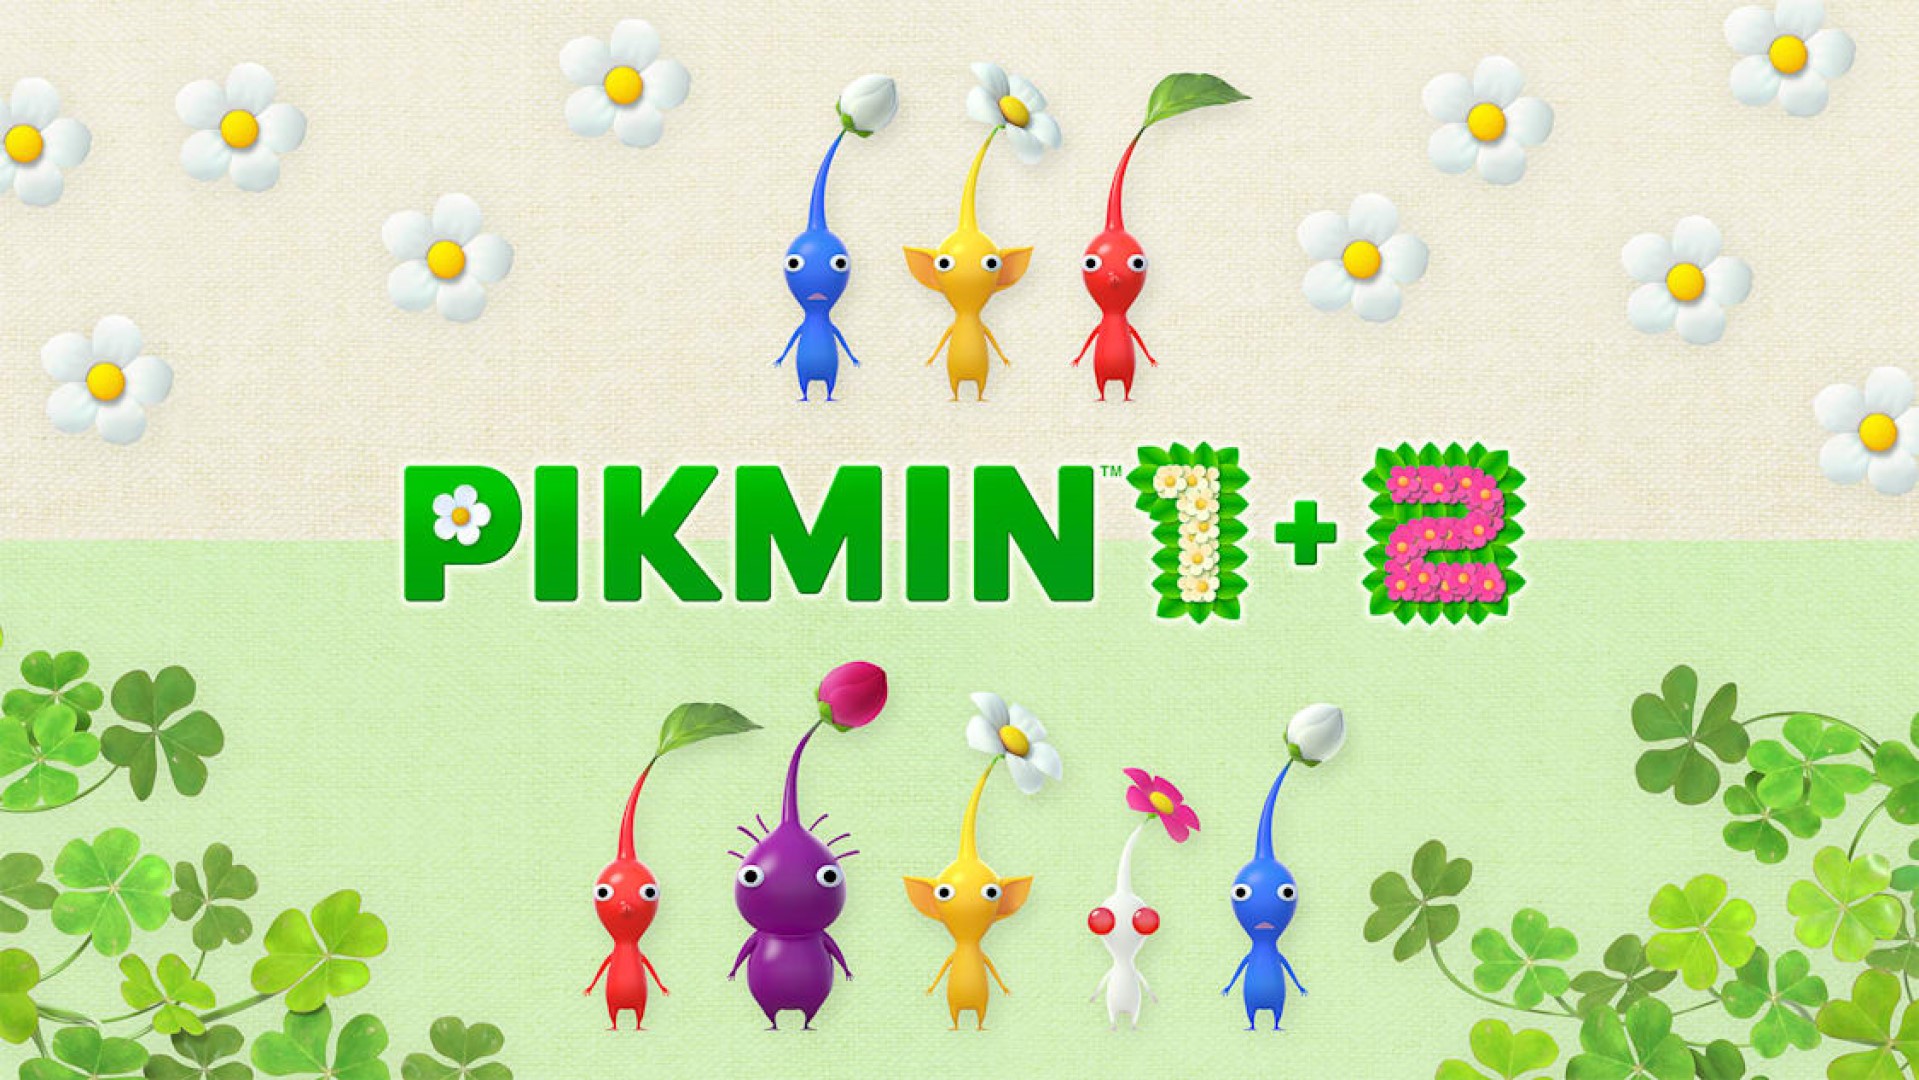 Pikmin 1 and 2 HD (Switch) Review – Flower Power